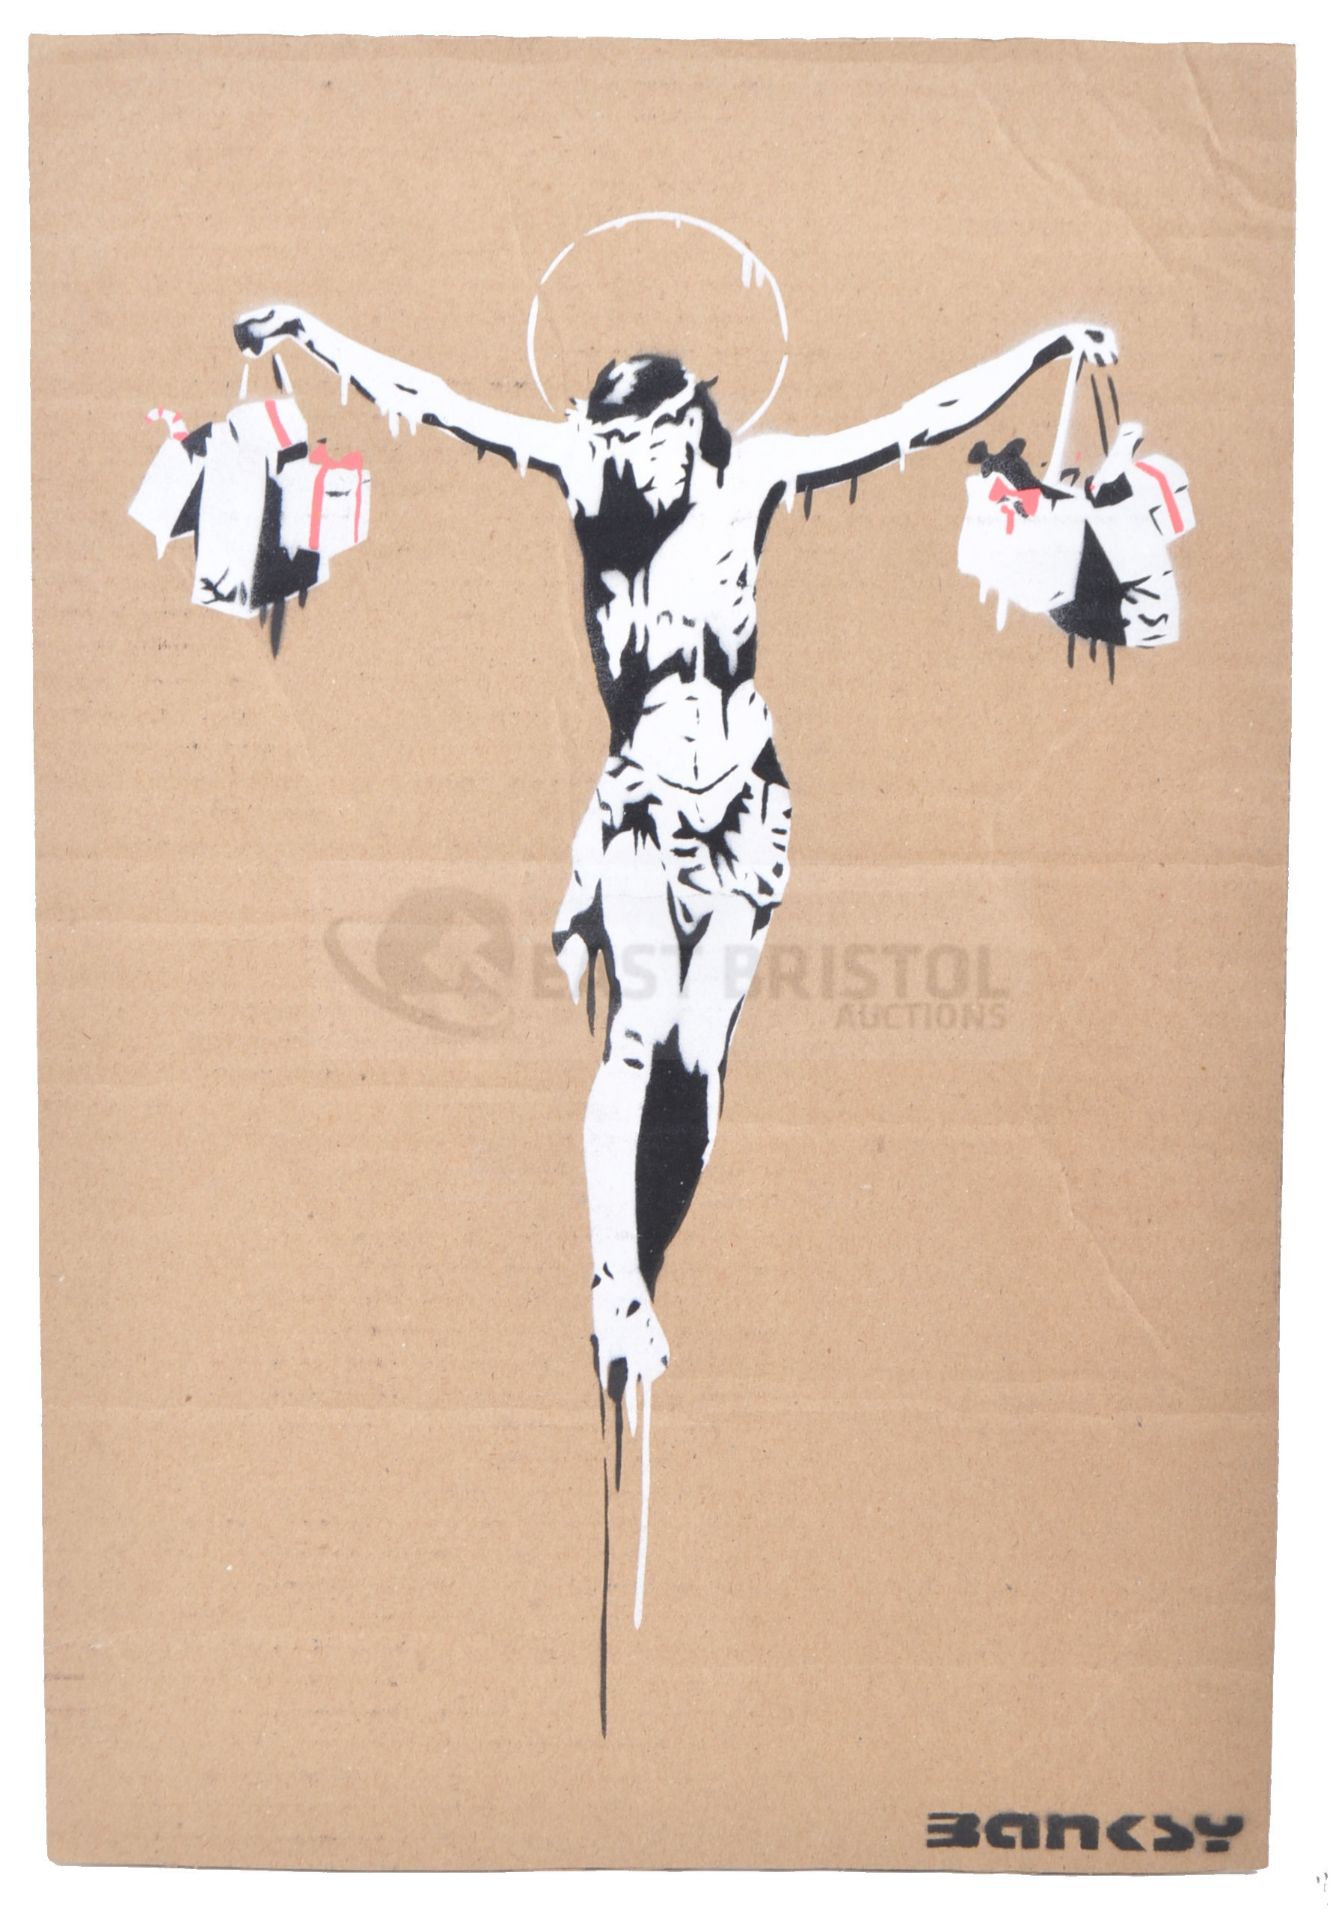 BANKSY - DISMALAND 2015 - CHRIST WITH SHOPPING BAGS